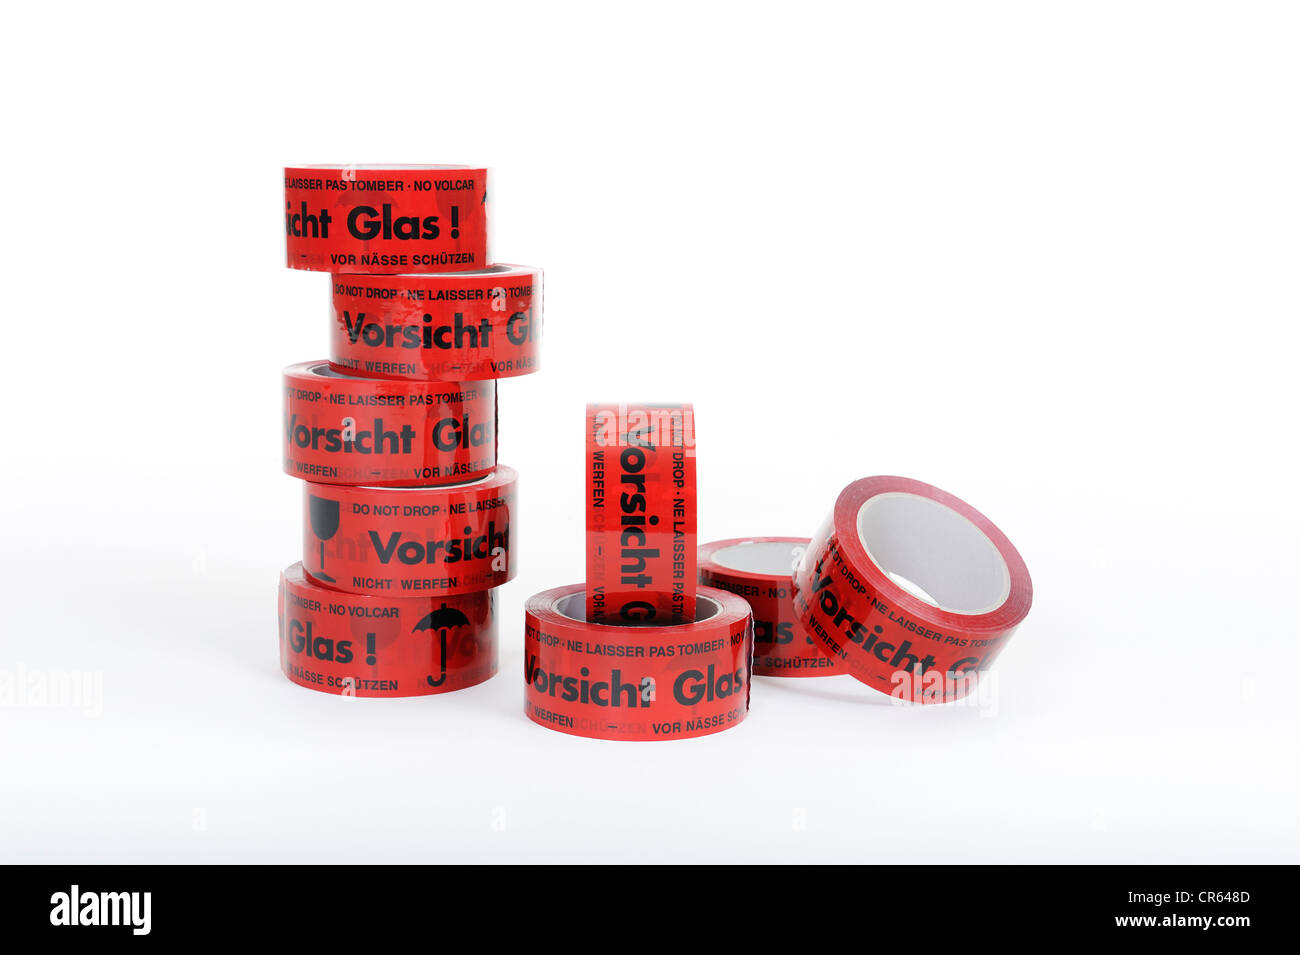 Adhesive tape with label 'Vorsicht Glas', German for 'Caution Glass' Stock Photo